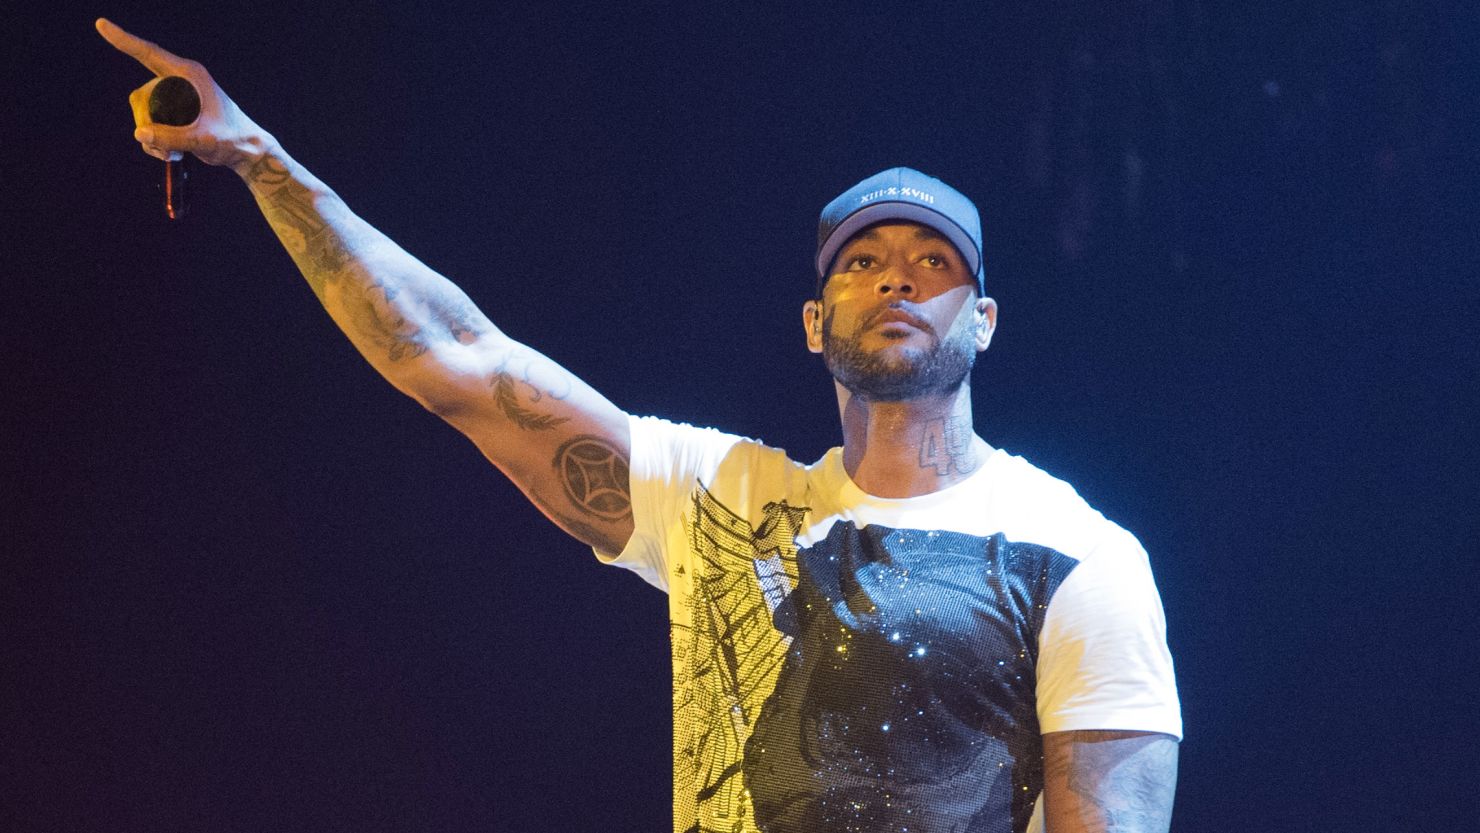 Booba is one of France's best-known rappers.